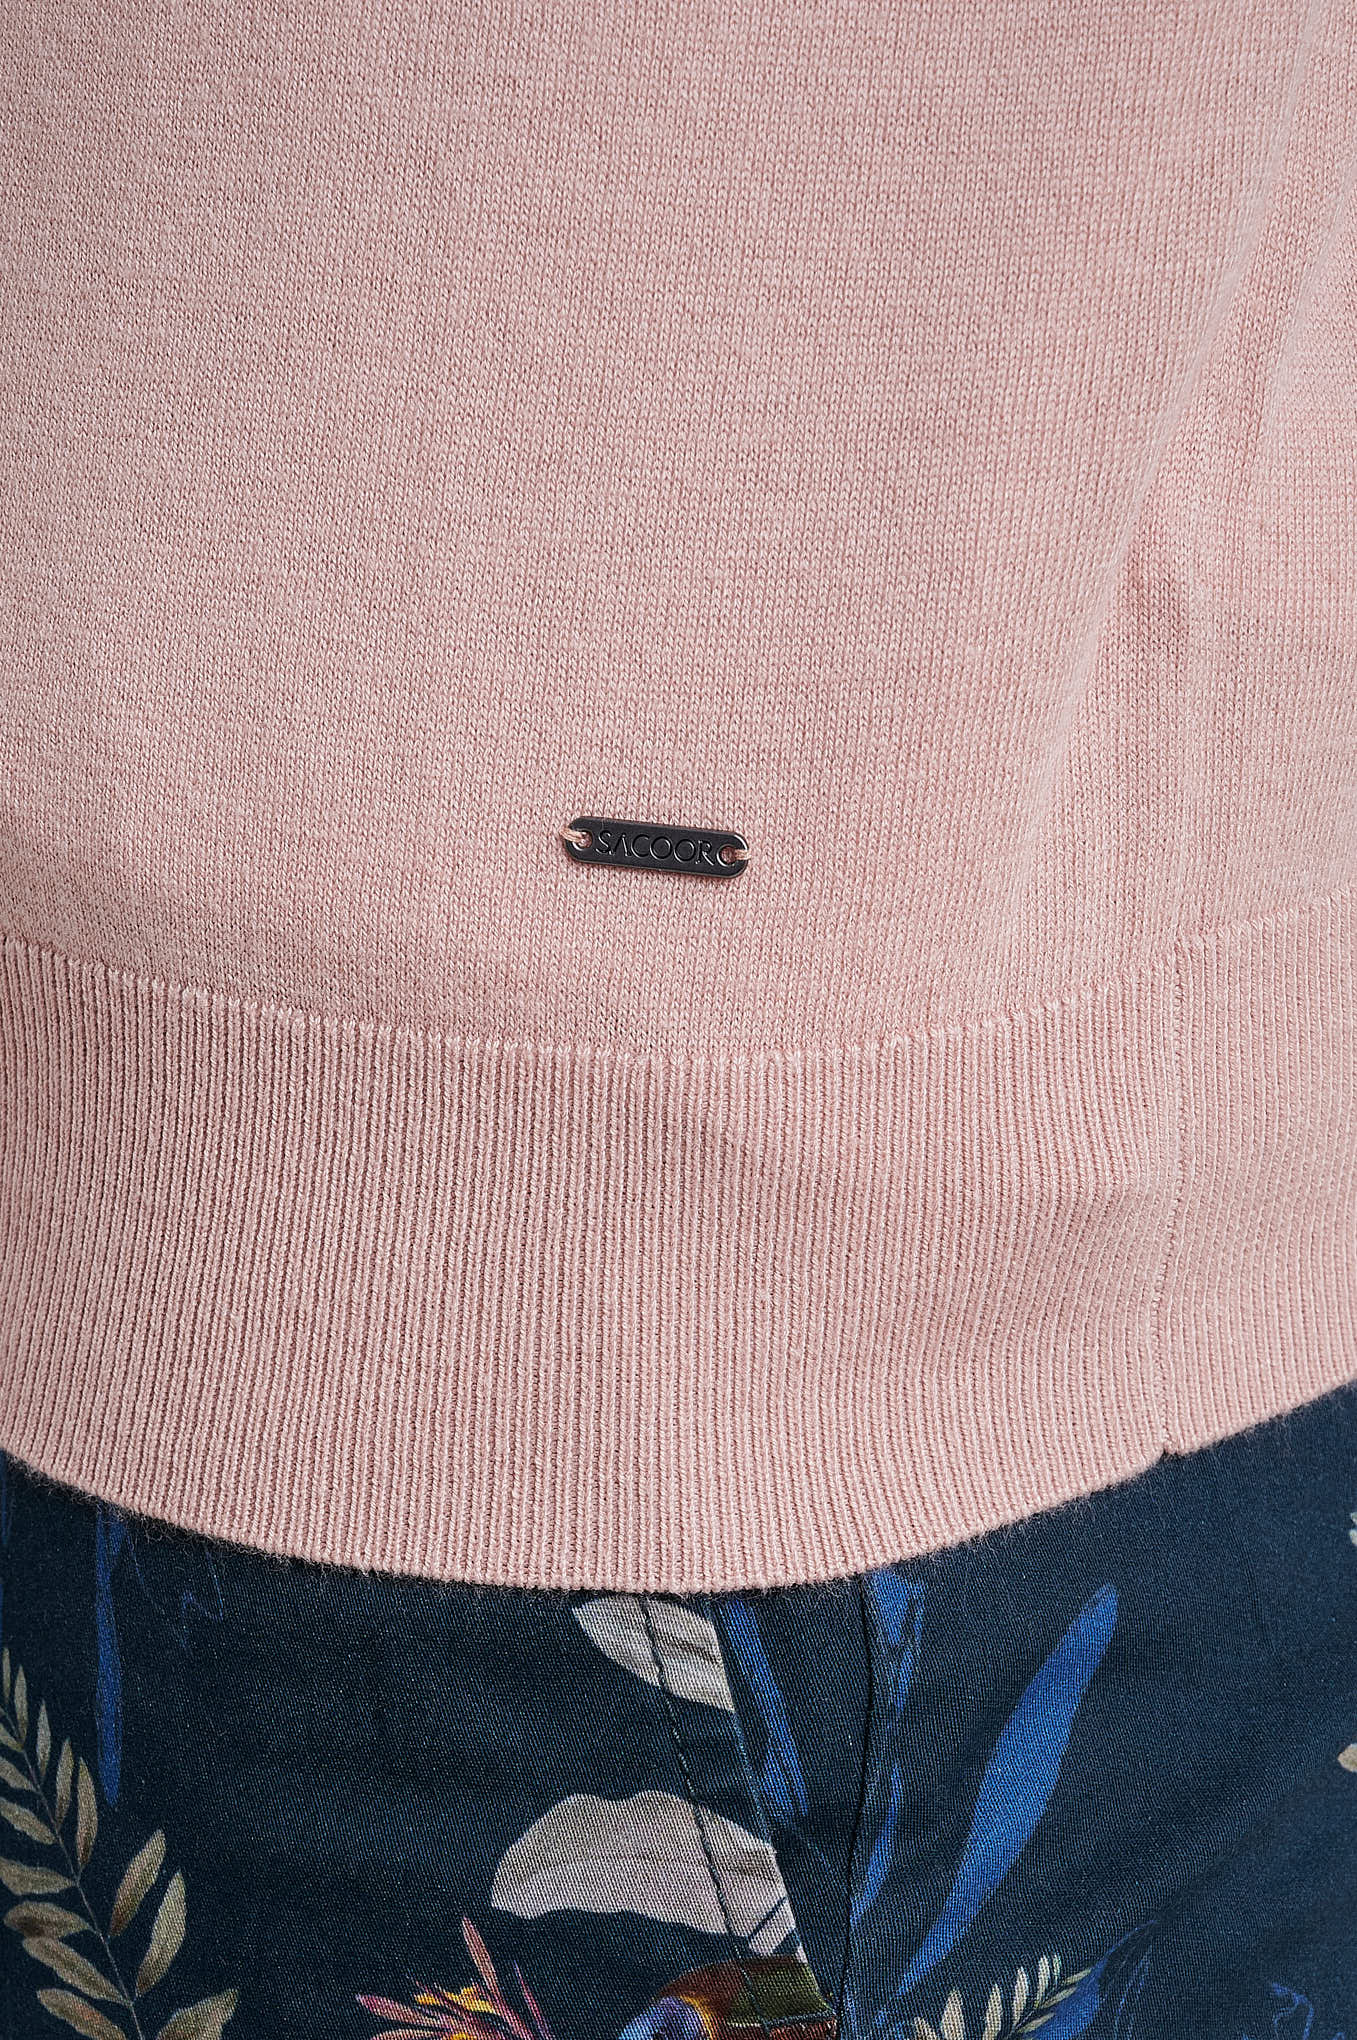 Sweater Pale Pink Casual Man